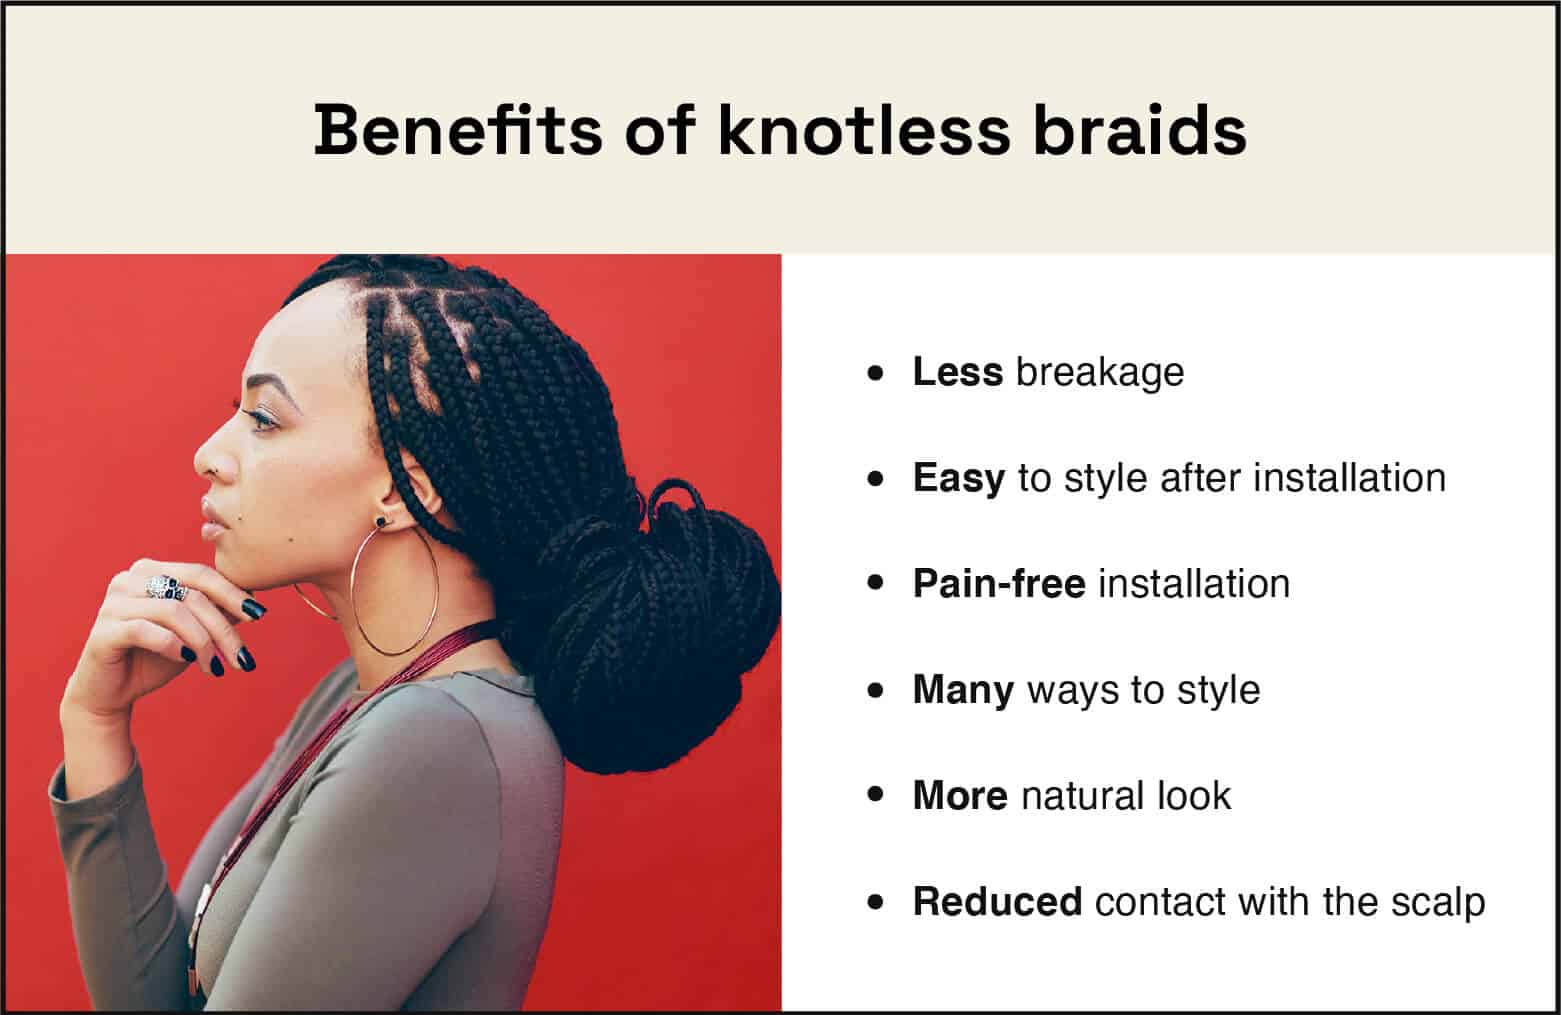 photo on the left of woman with knotless braids looking to the side, standing in front of red background, copy on the right summarizing the benefits of knotless braids